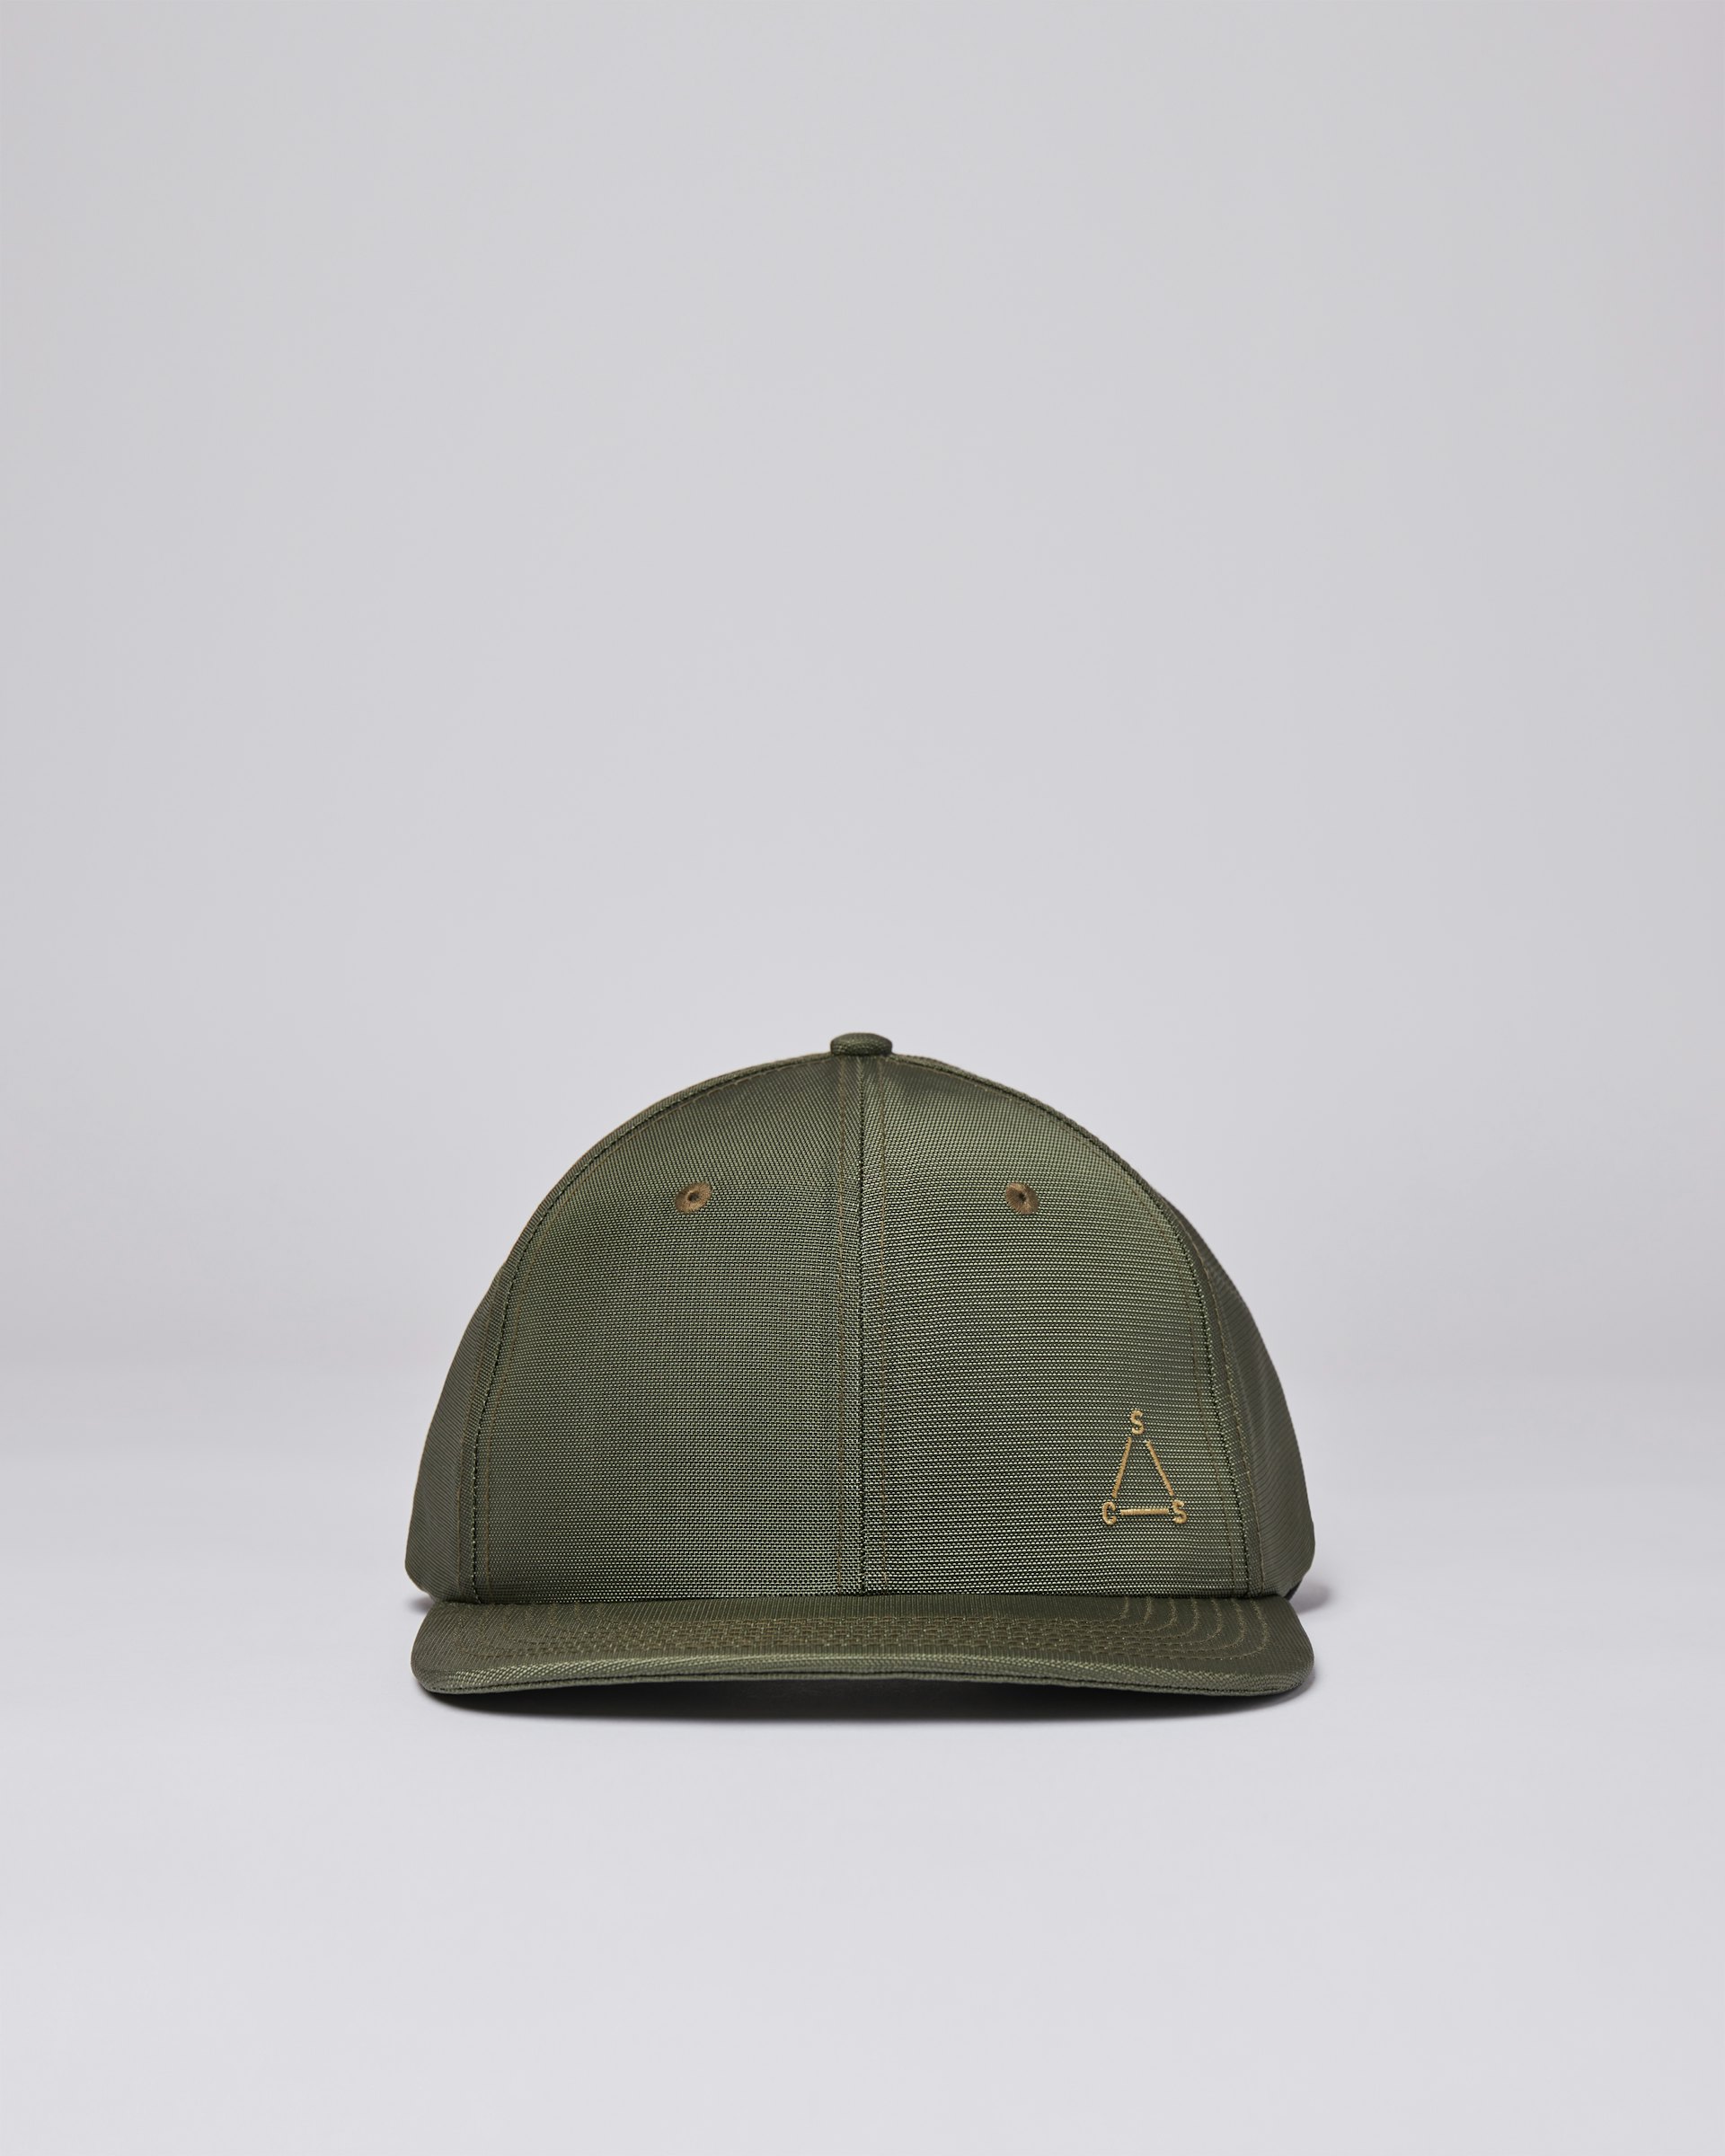 Hike Cap belongs to the category Artikel and is in color green